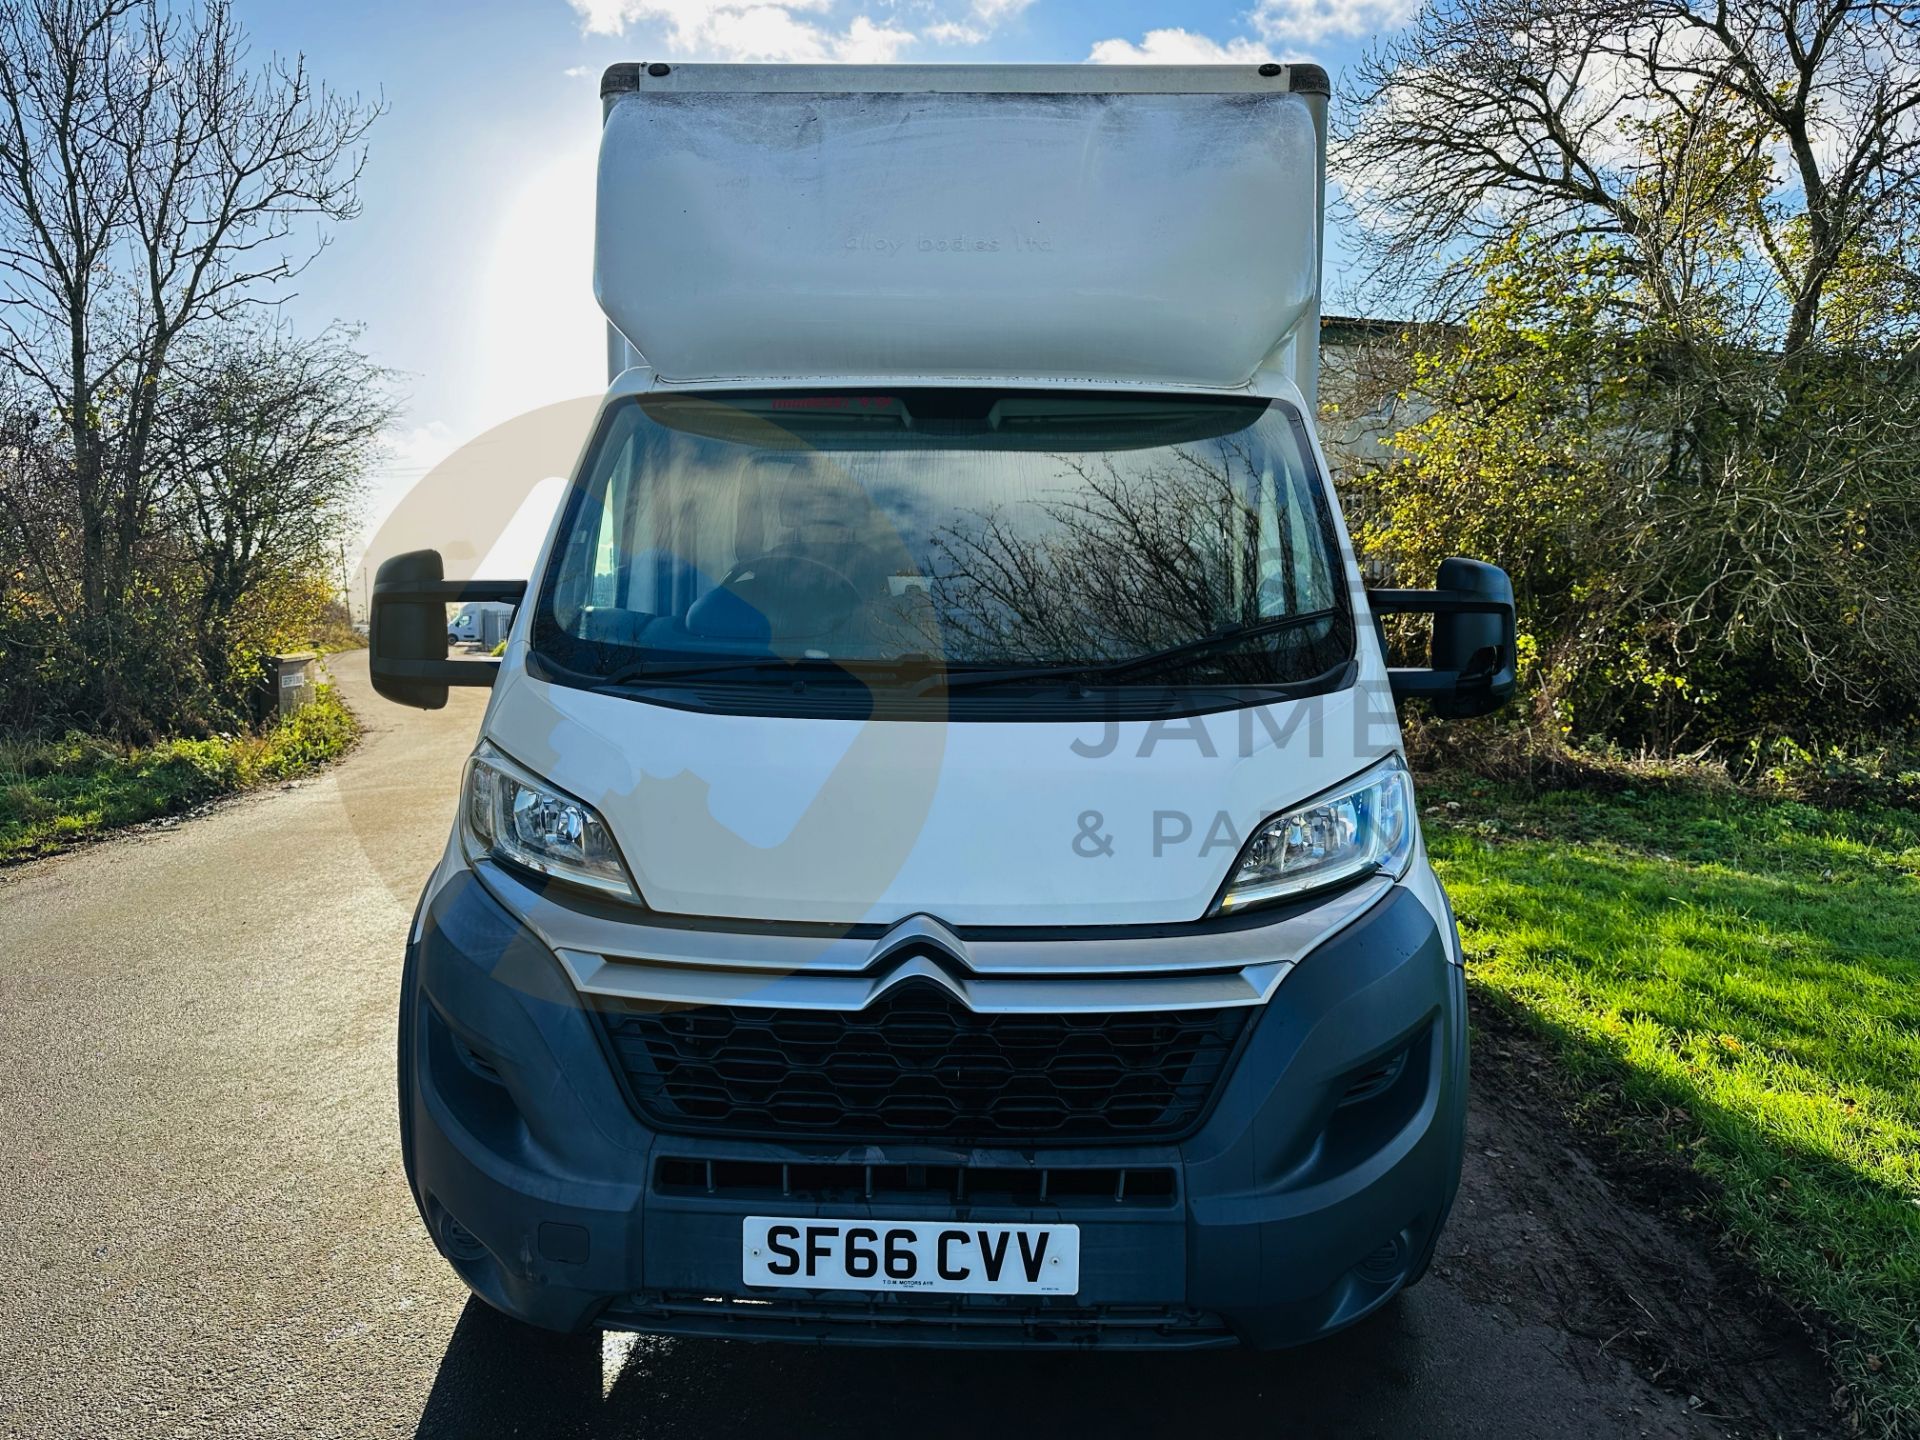 CITROEN RELAY - LUTON BOX / VAN WITH TAIL LIFT - 2017 MODEL - ONLY 39K MILES - ULEZ COMPLAINT!!! - Image 3 of 28